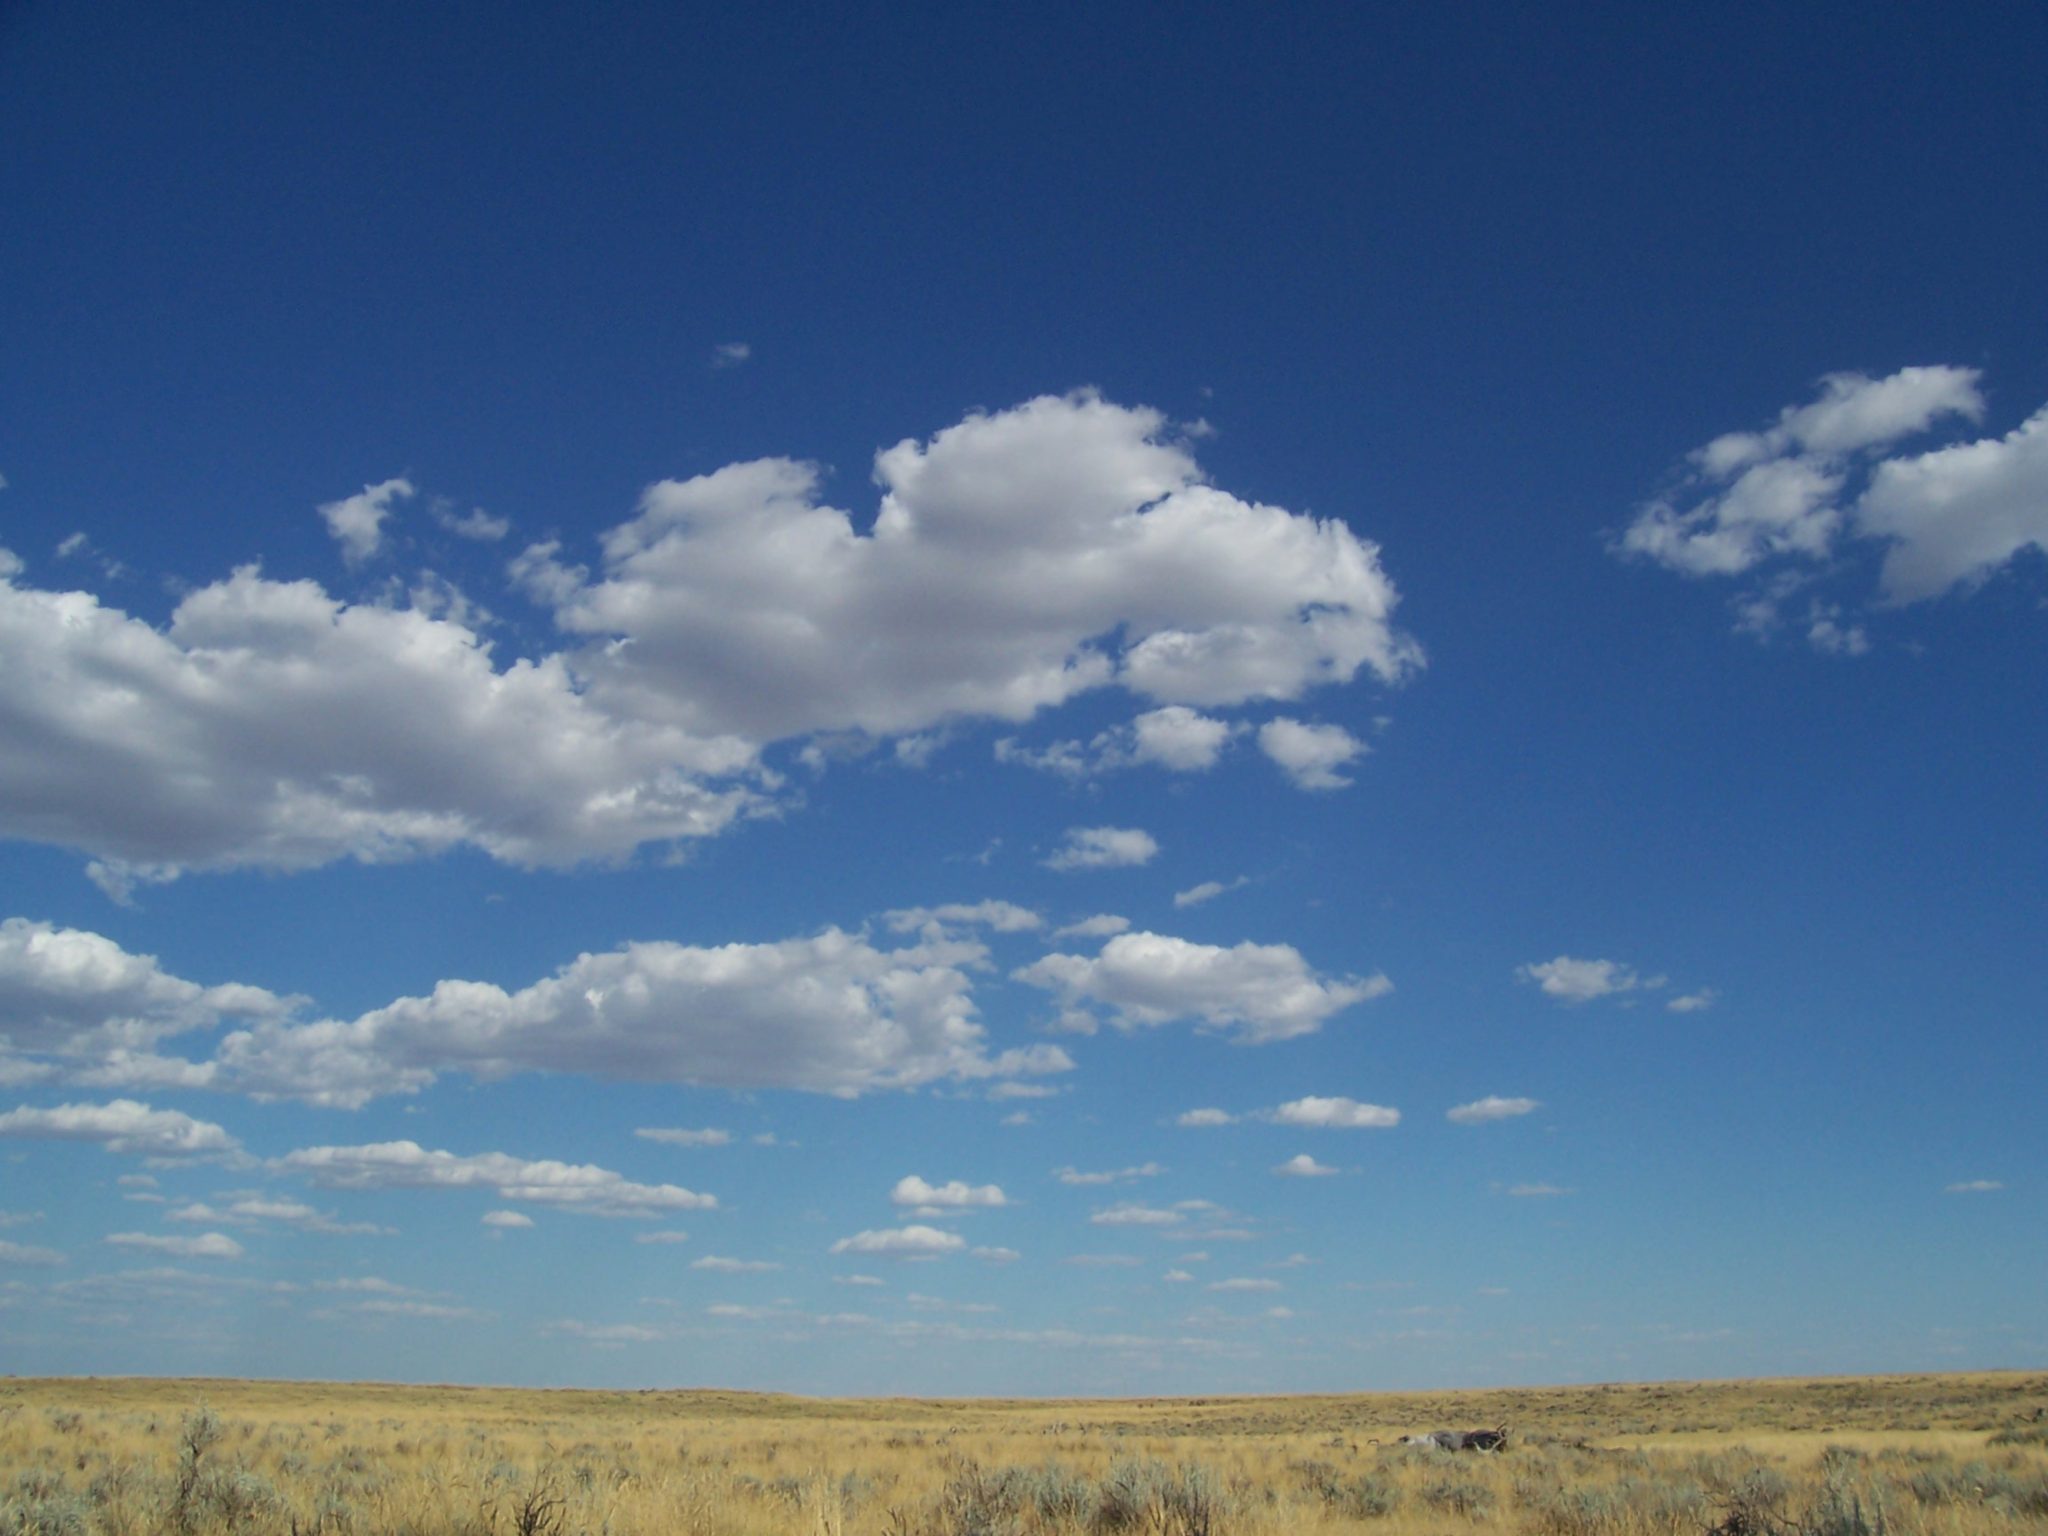 Clouds over the desert of Wyoming